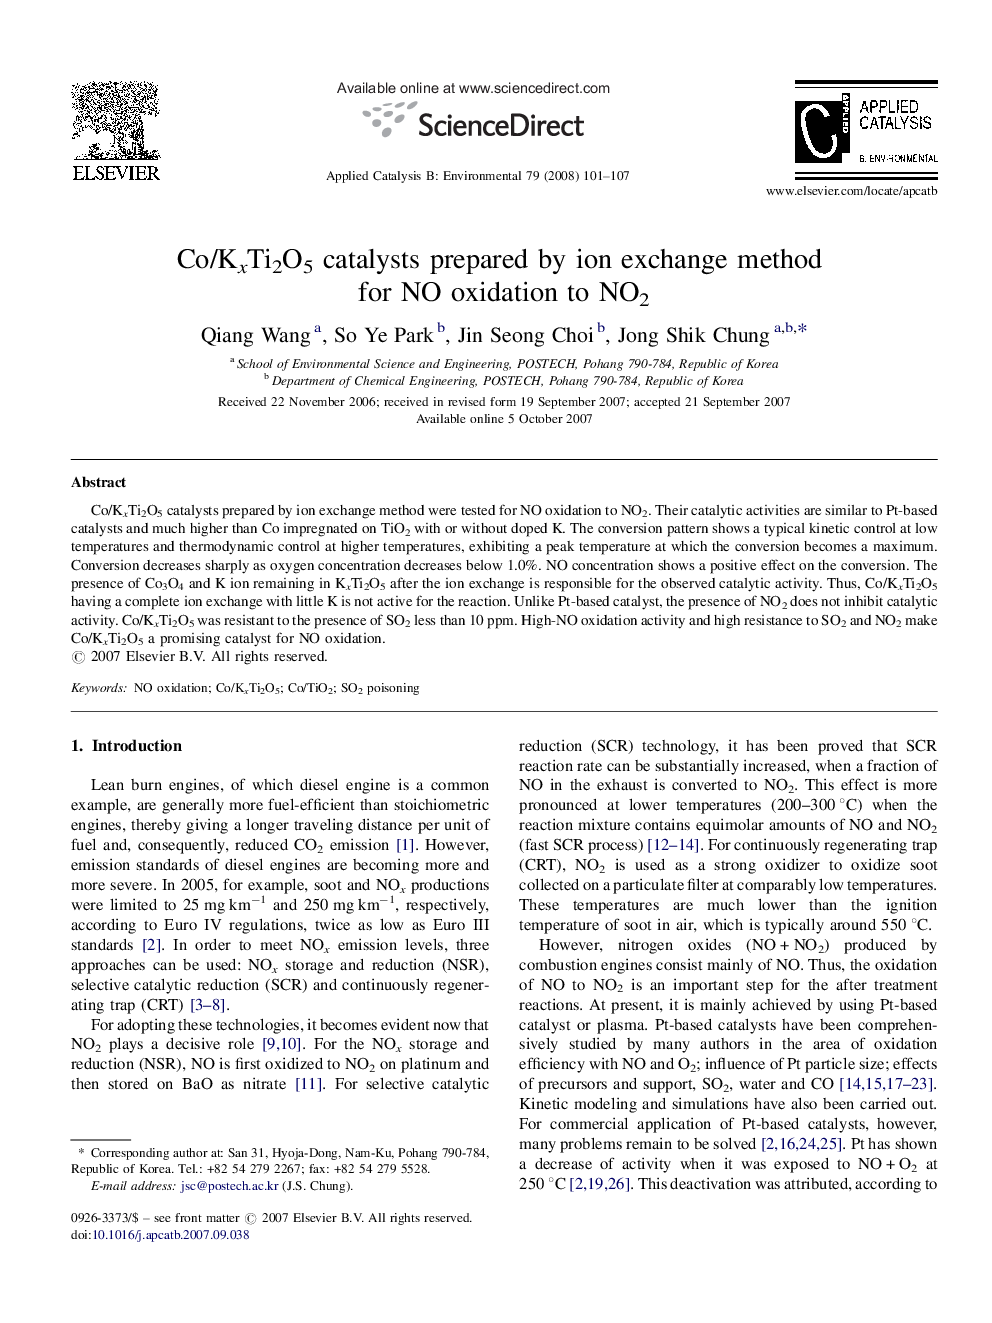 Co/KxTi2O5 catalysts prepared by ion exchange method for NO oxidation to NO2